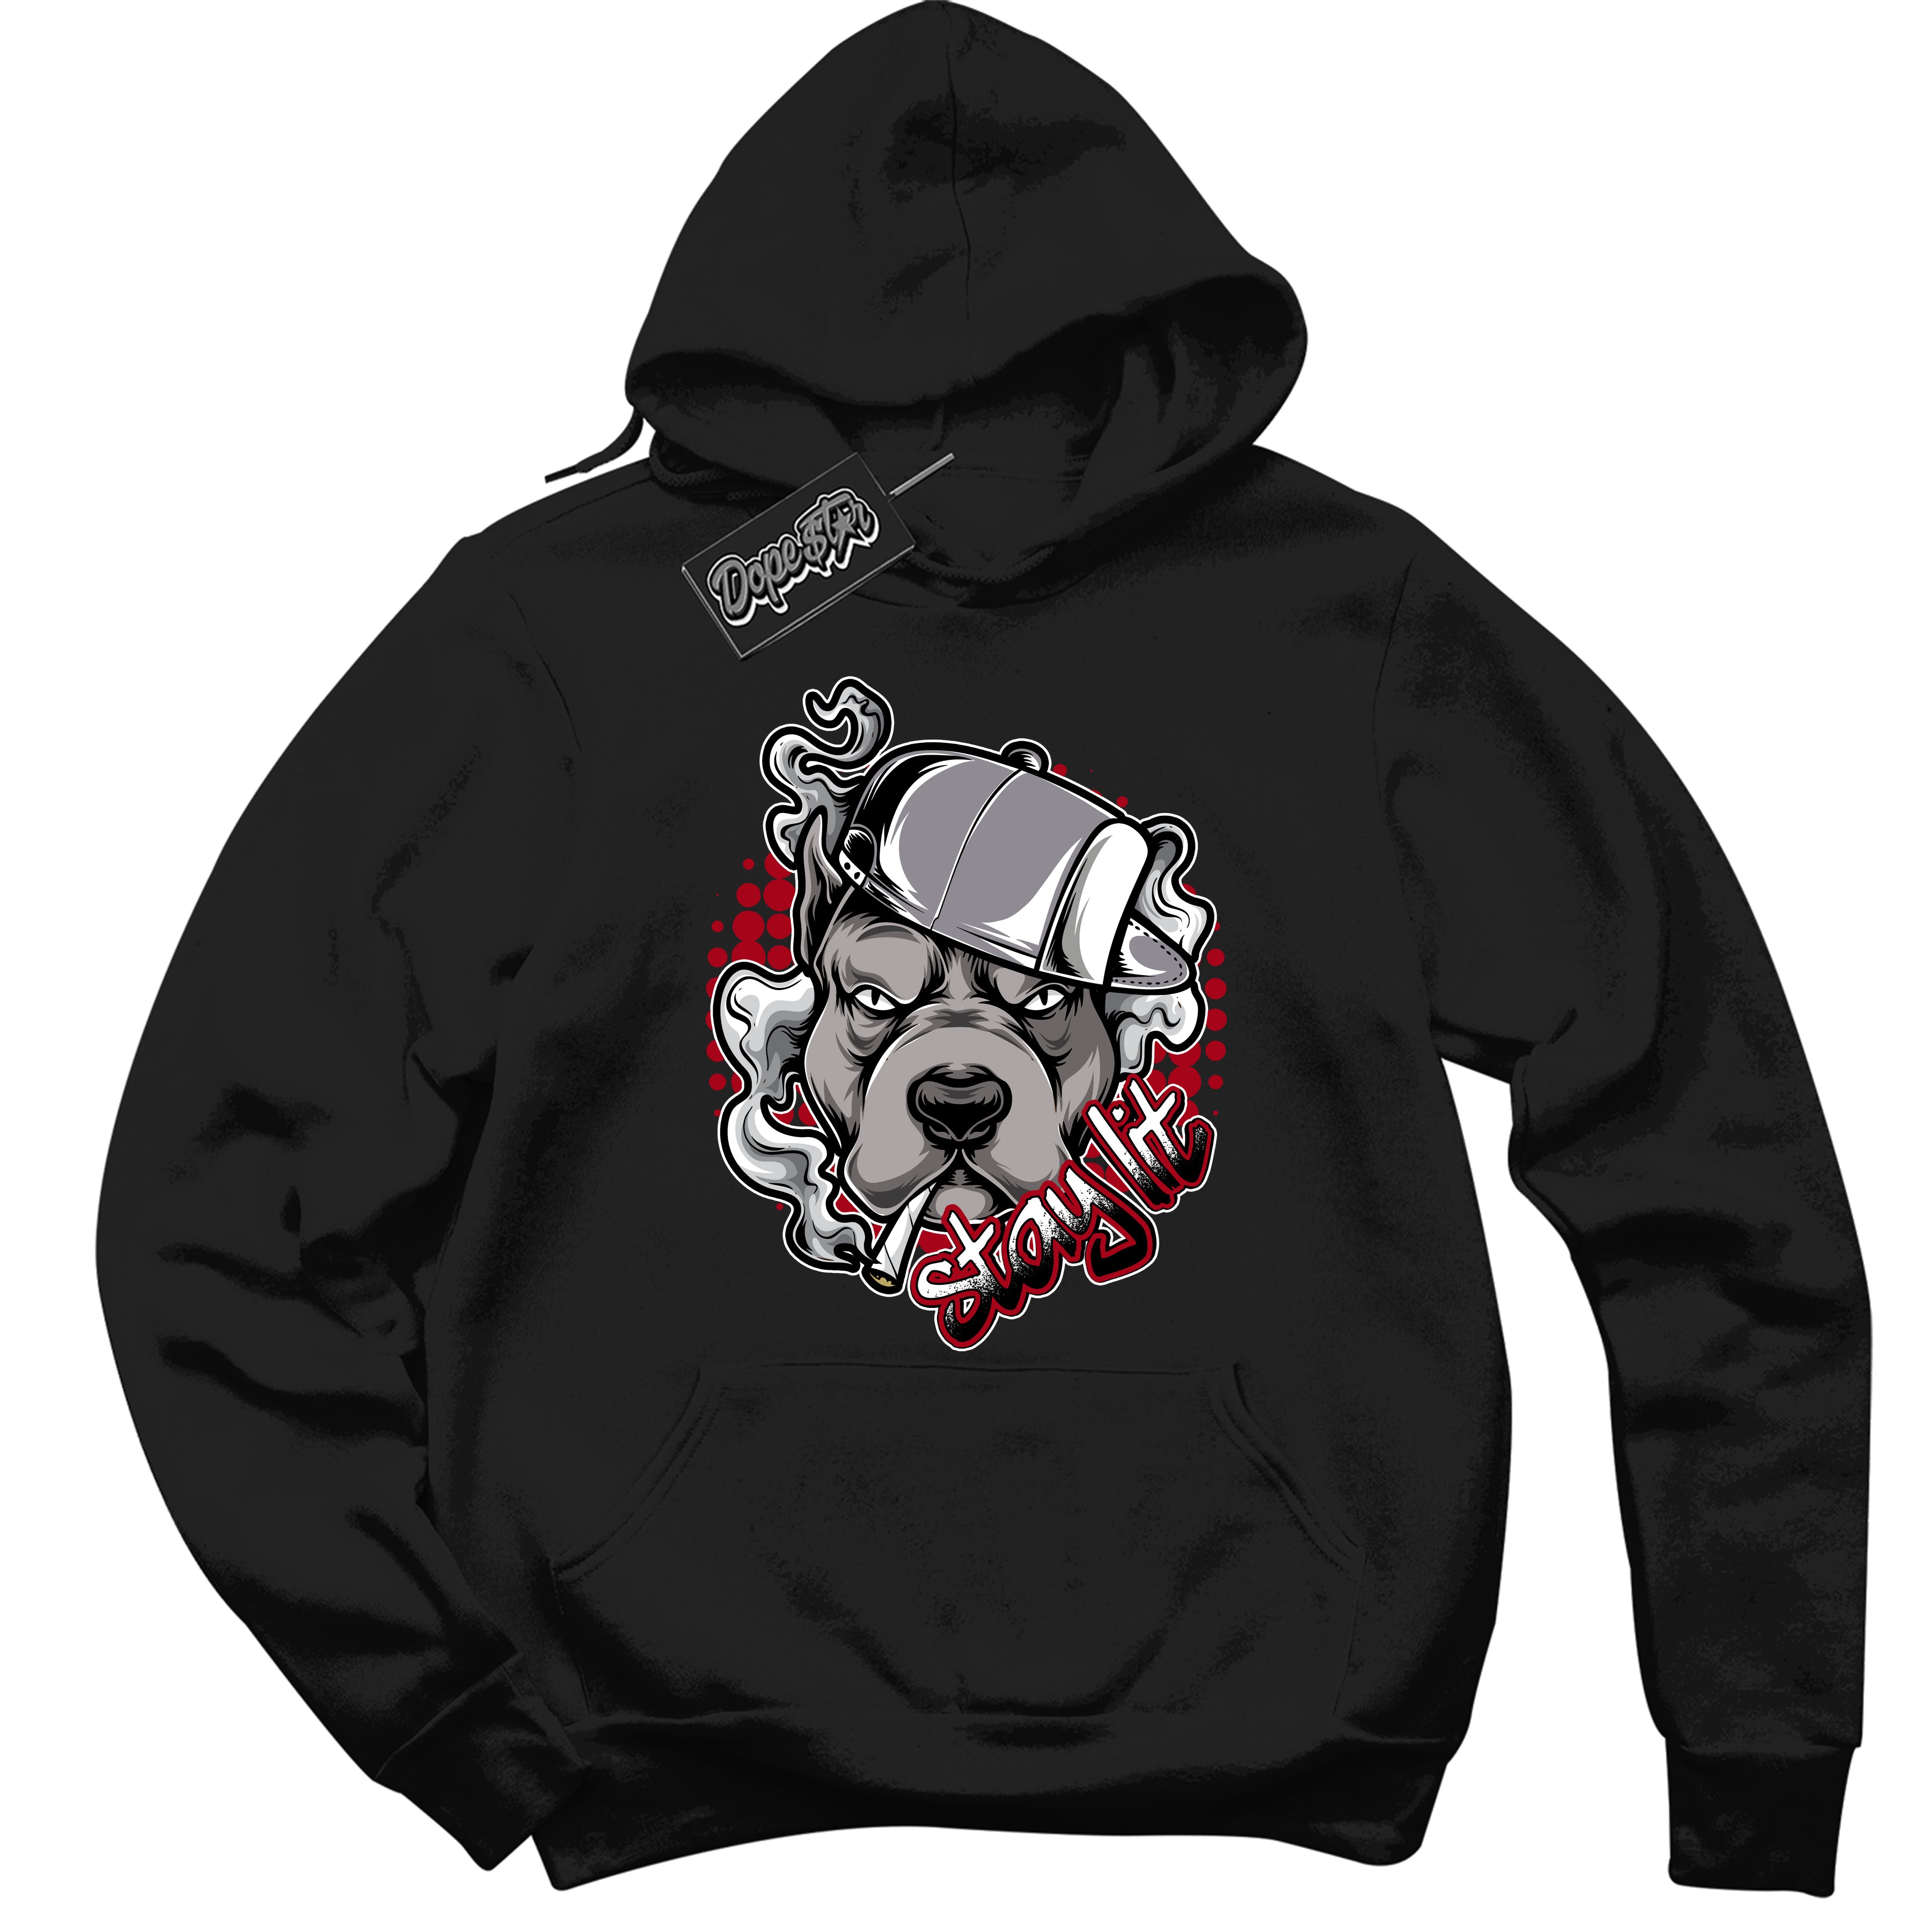 Cool Black Hoodie with “ Stay Lit ”  design that Perfectly Matches  Bred Reimagined 4s Jordans.